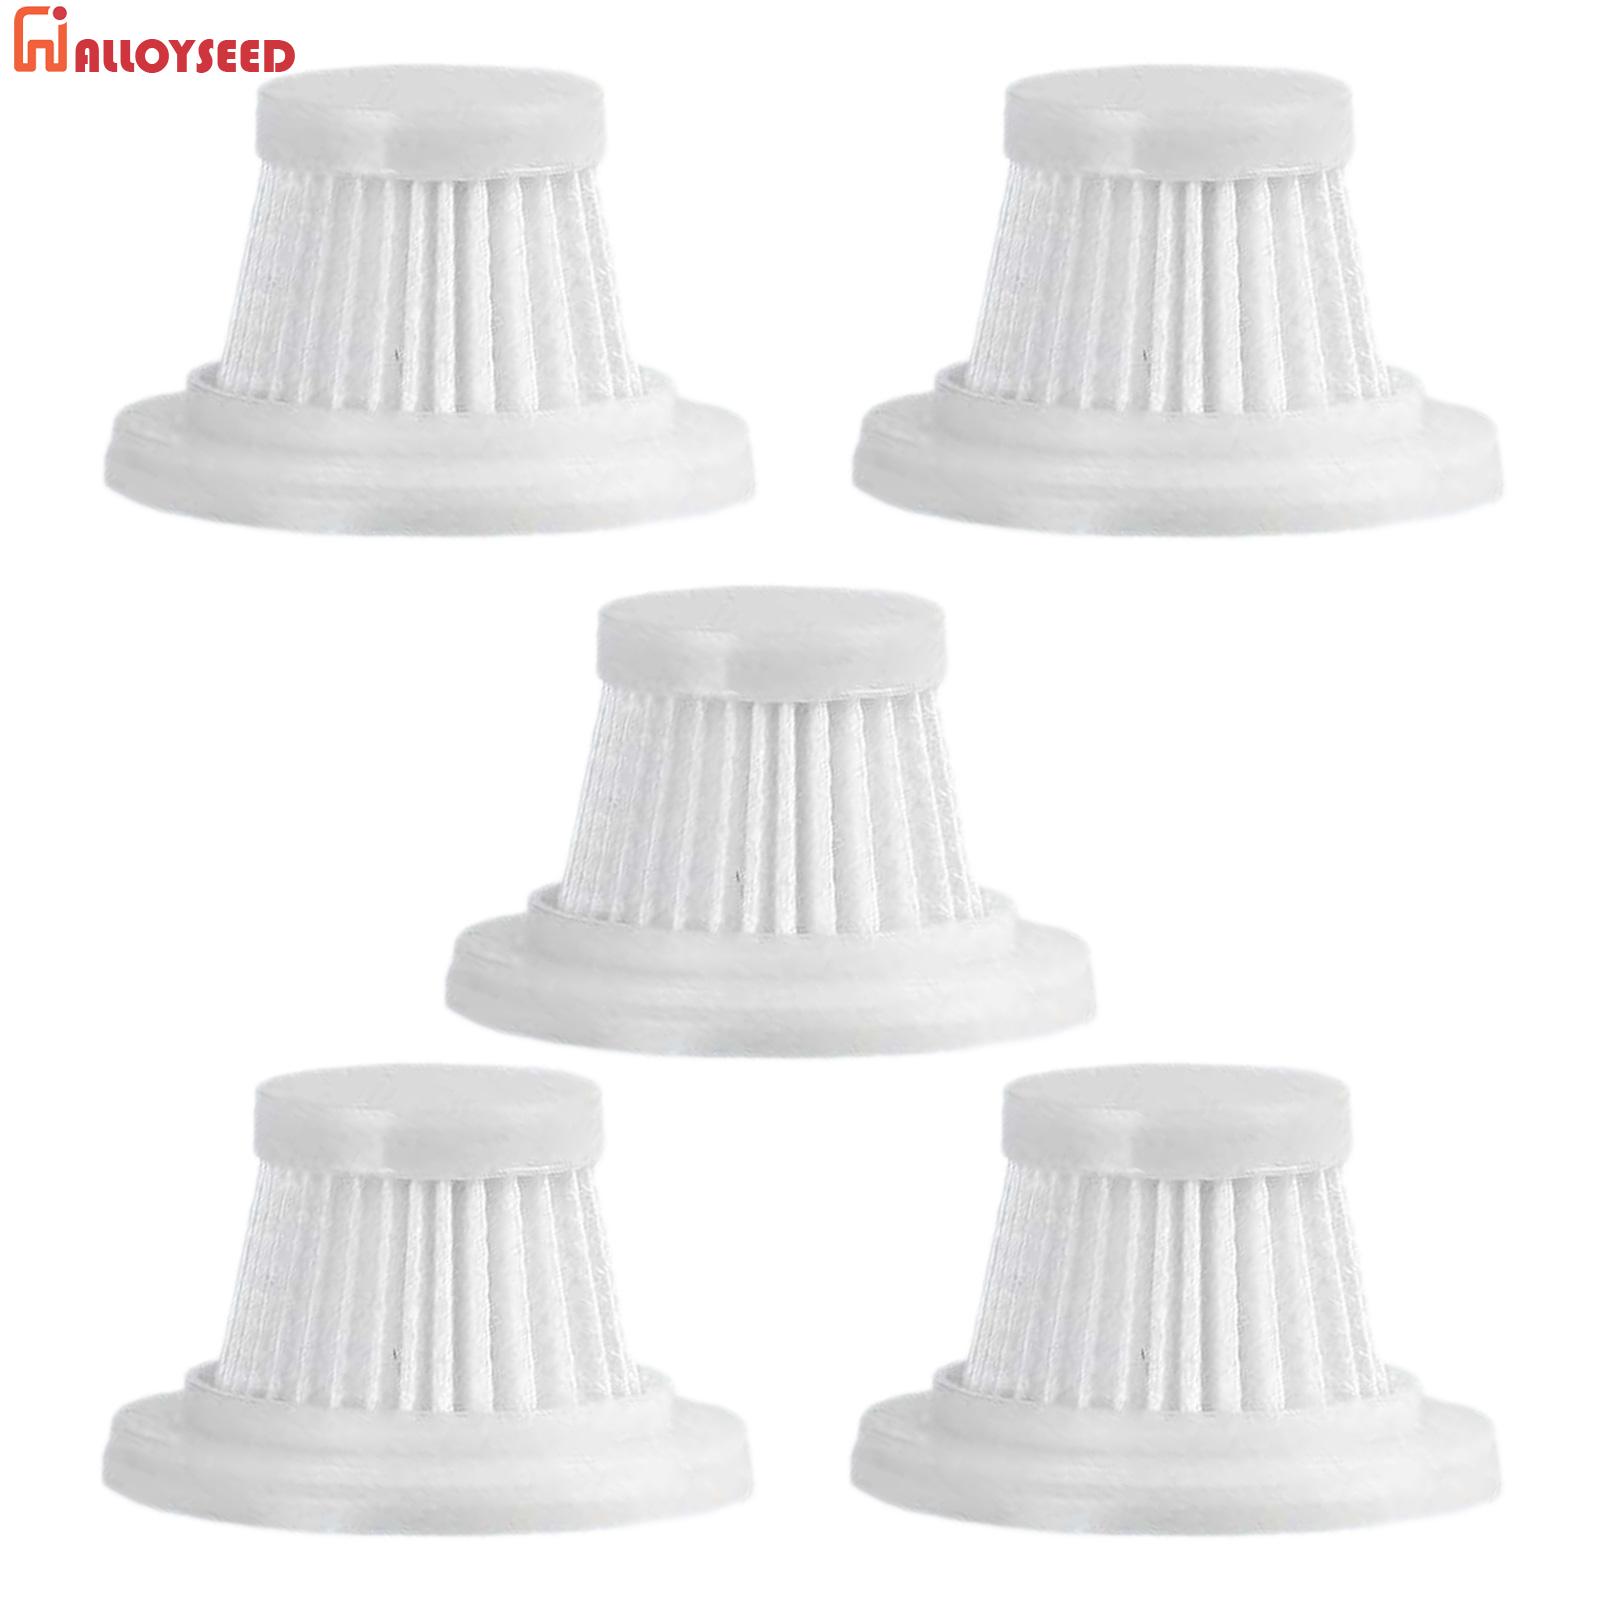 5pcs Duster Special Cleaning Filters Washable Vacuuming Machine Filter